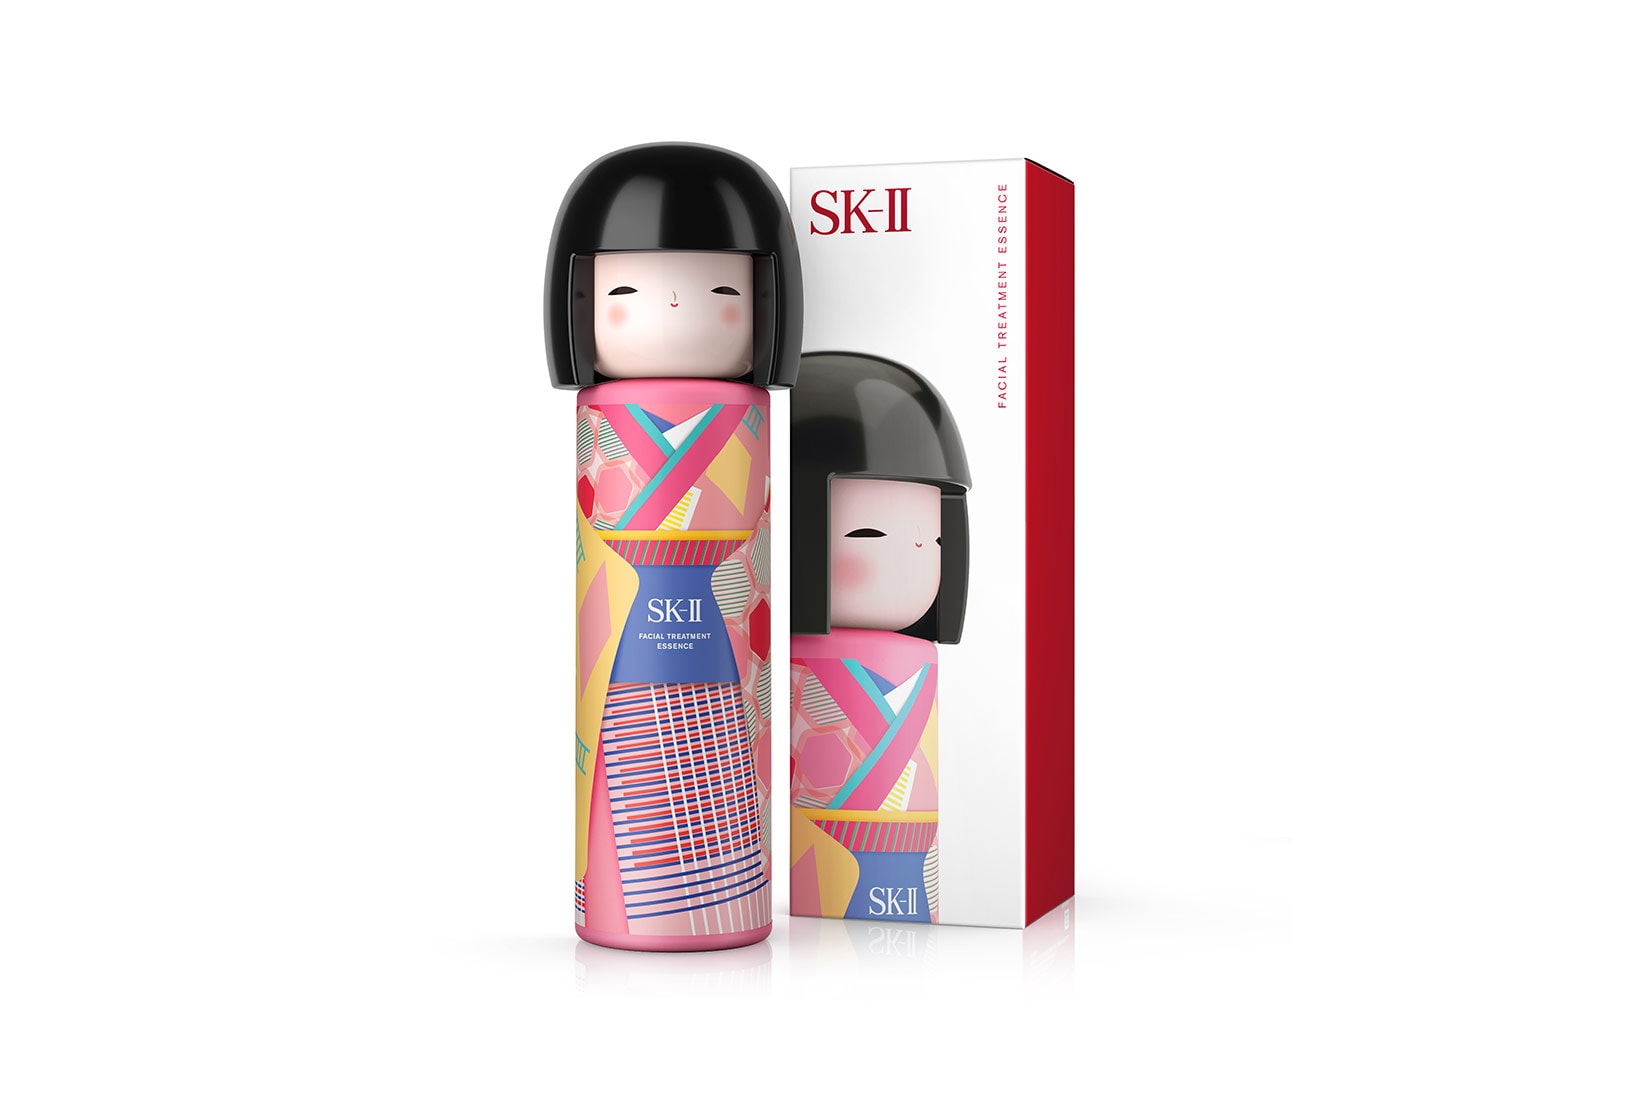 sk ii facial treatment essence serum fairy water limited edition bottle pink box front kimono skincare